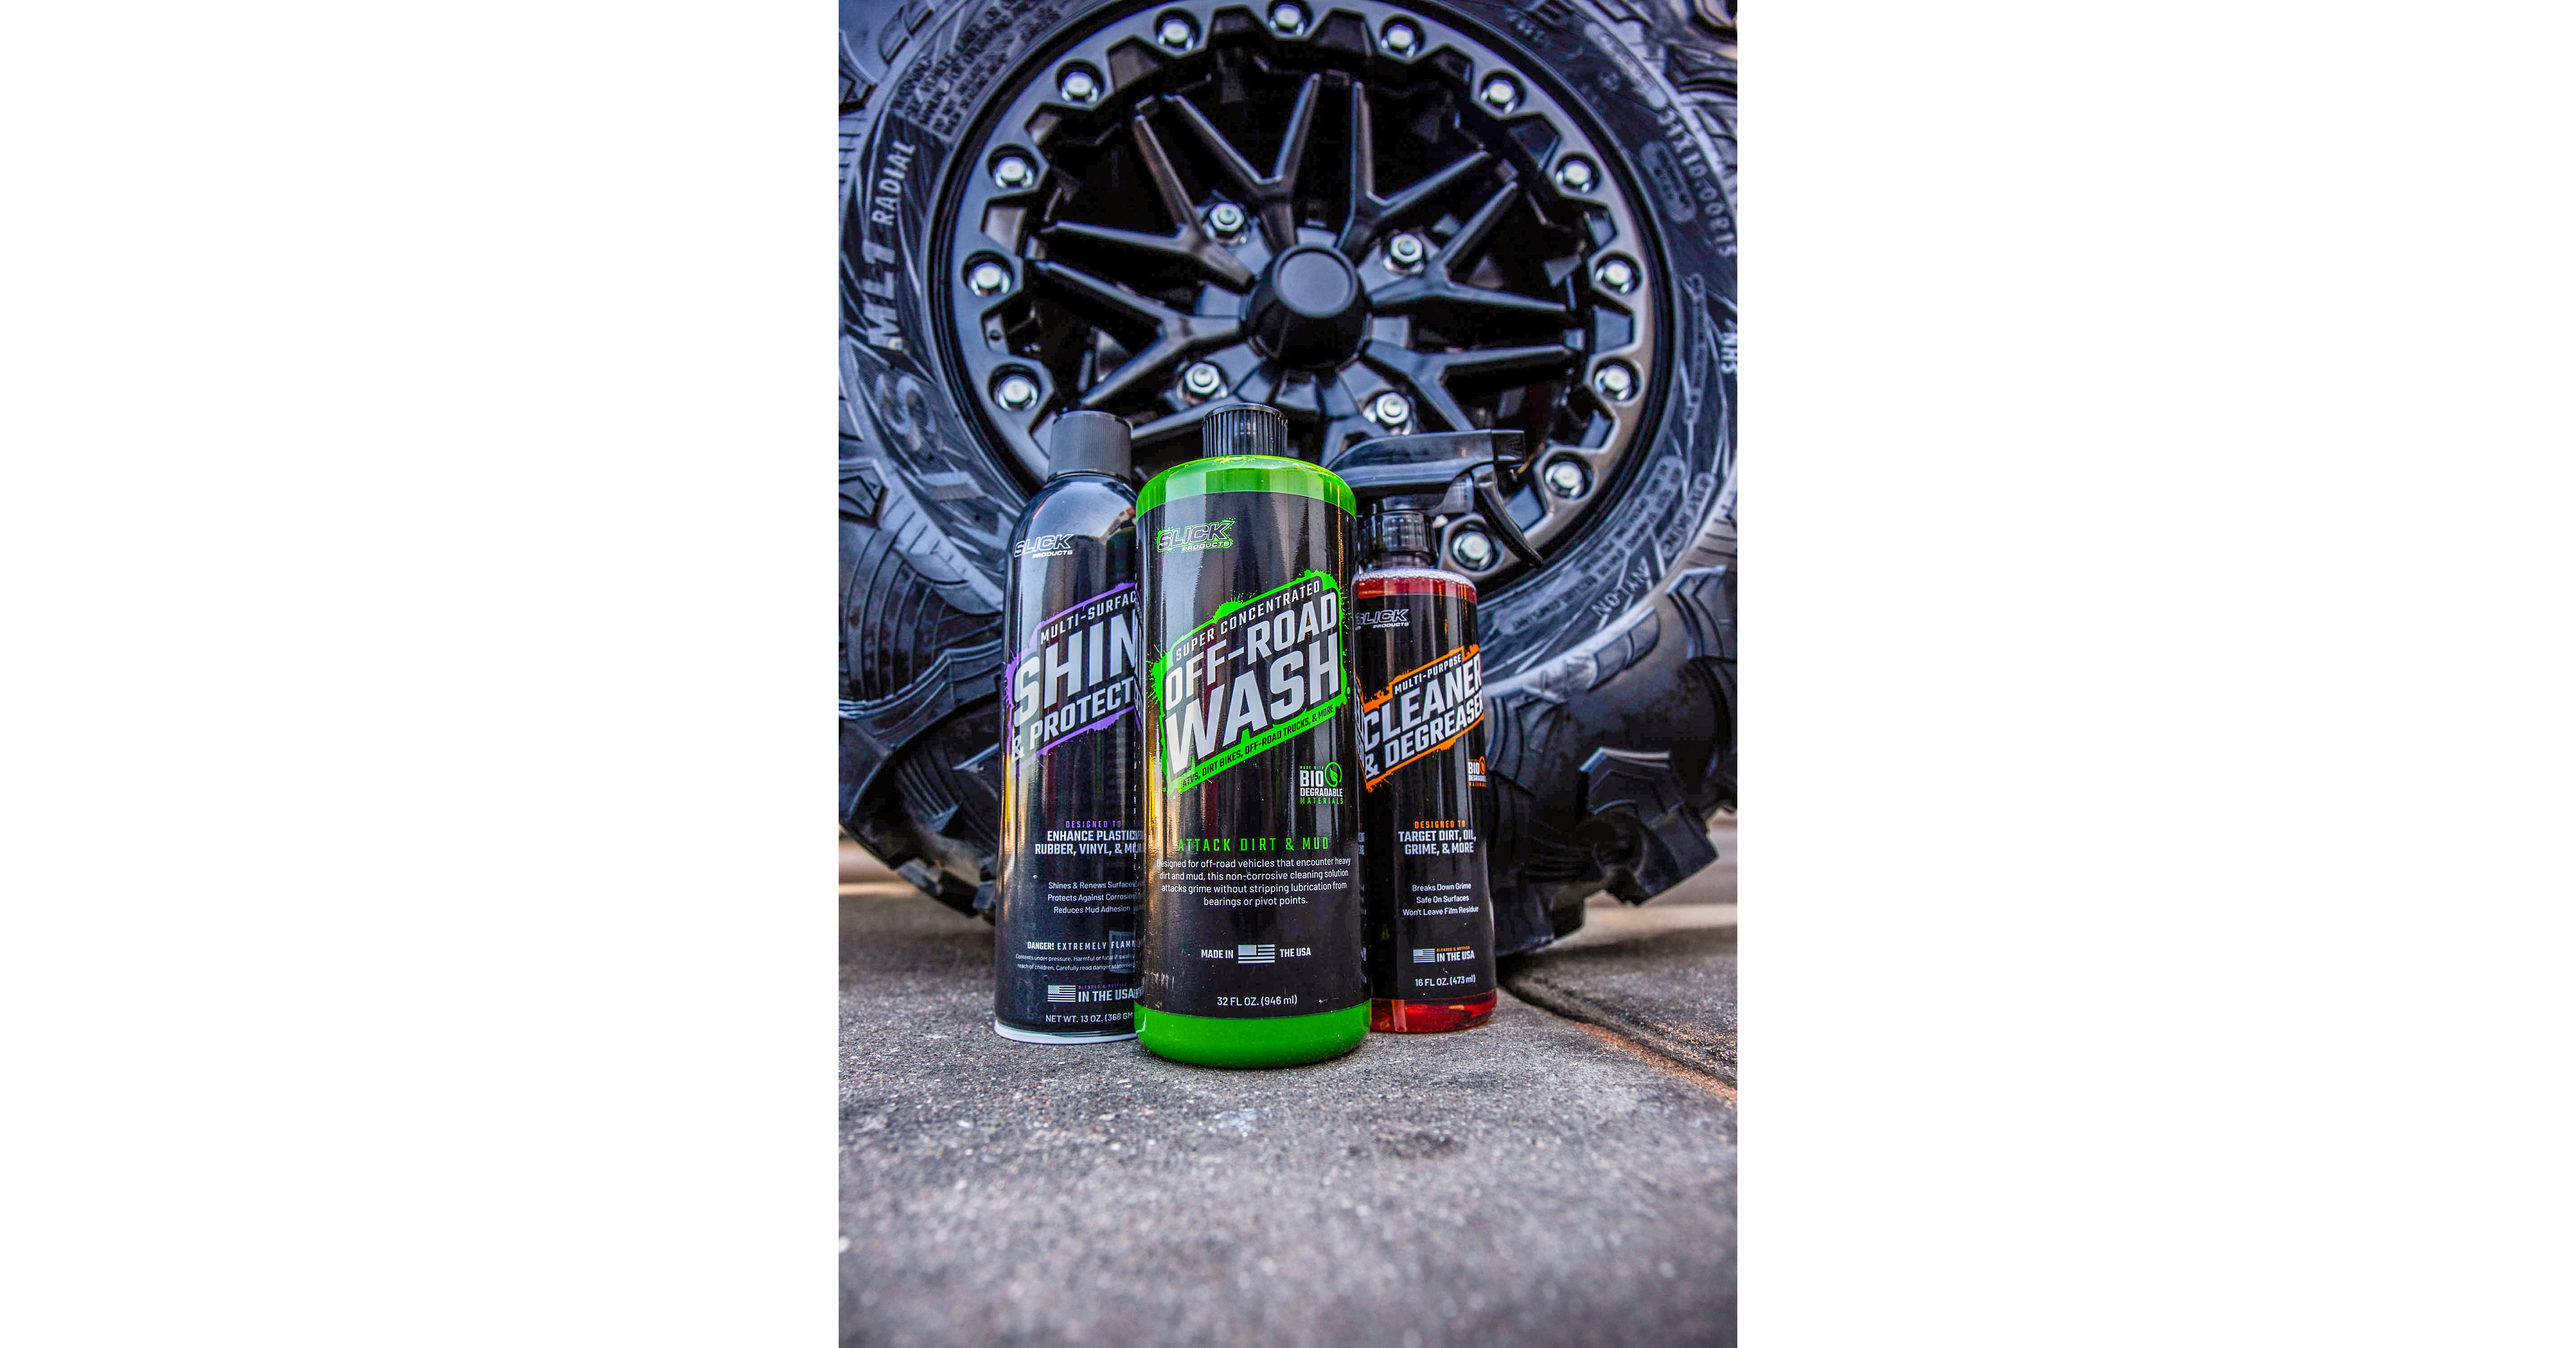 Slick Products OffRoad Wash 32 oz Pressure Washer Cleaning Solutions at